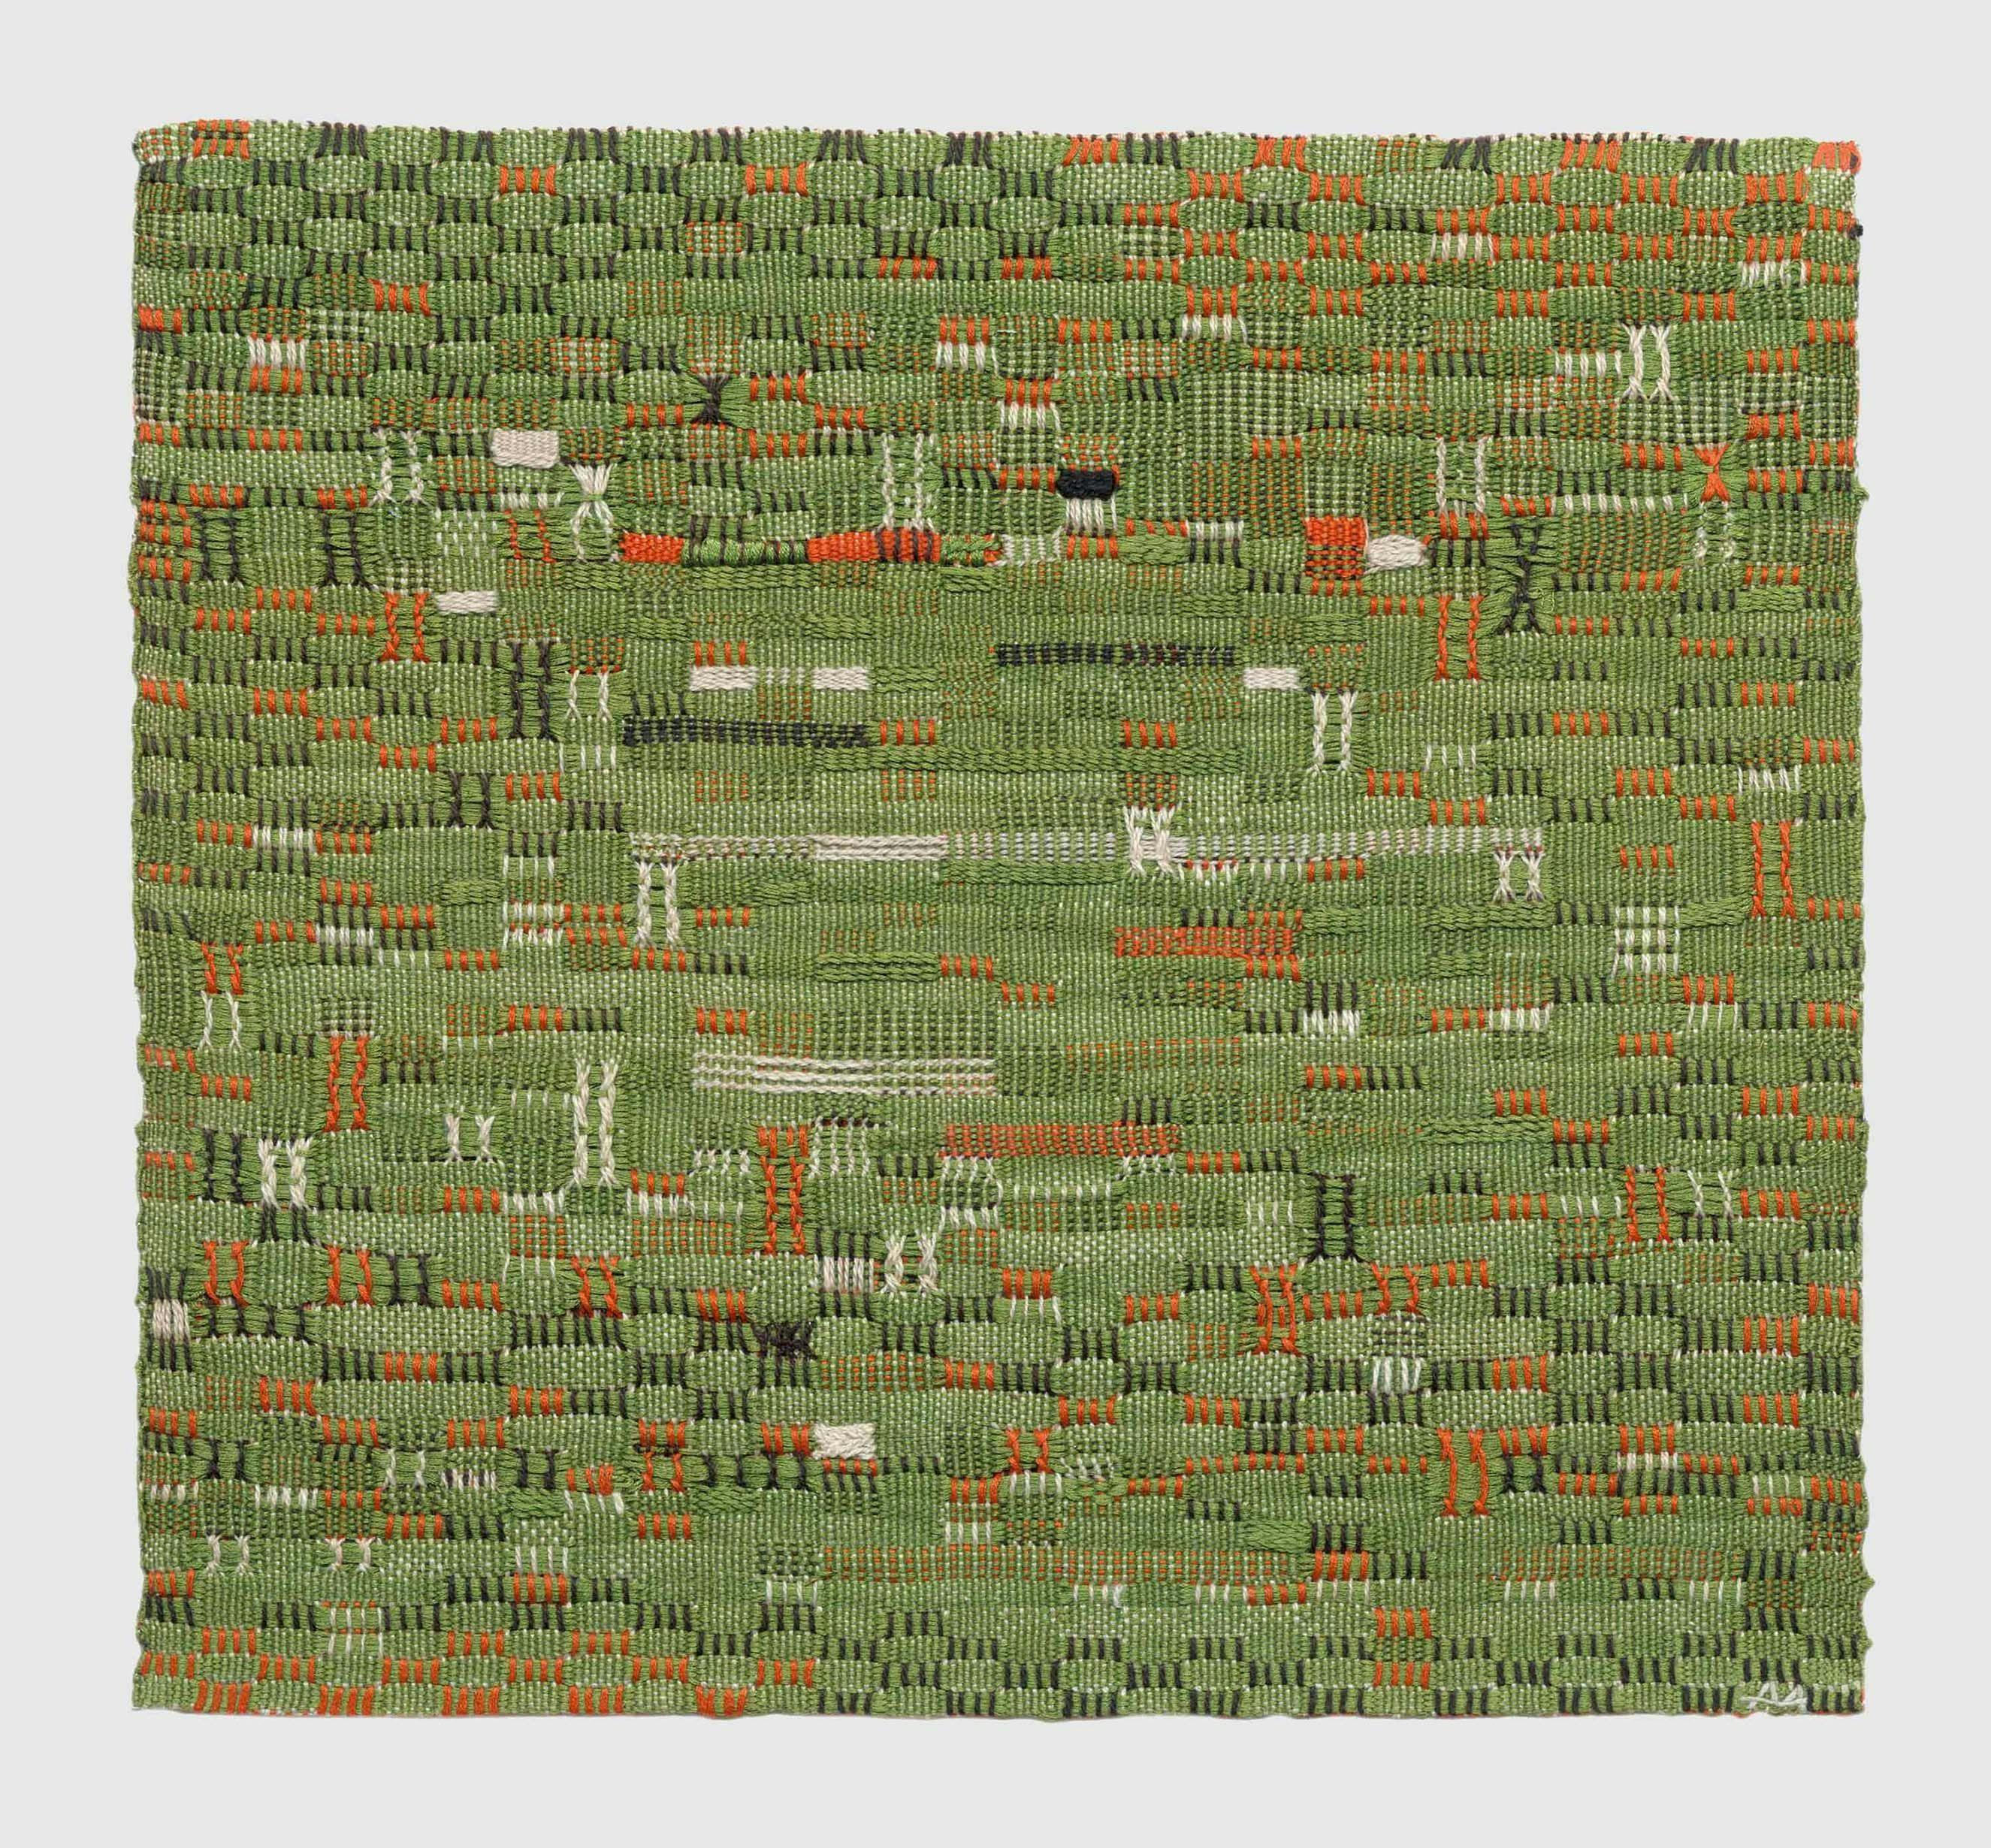 A cotton textile by Anni Albers, titled Pasture, dated 1958.